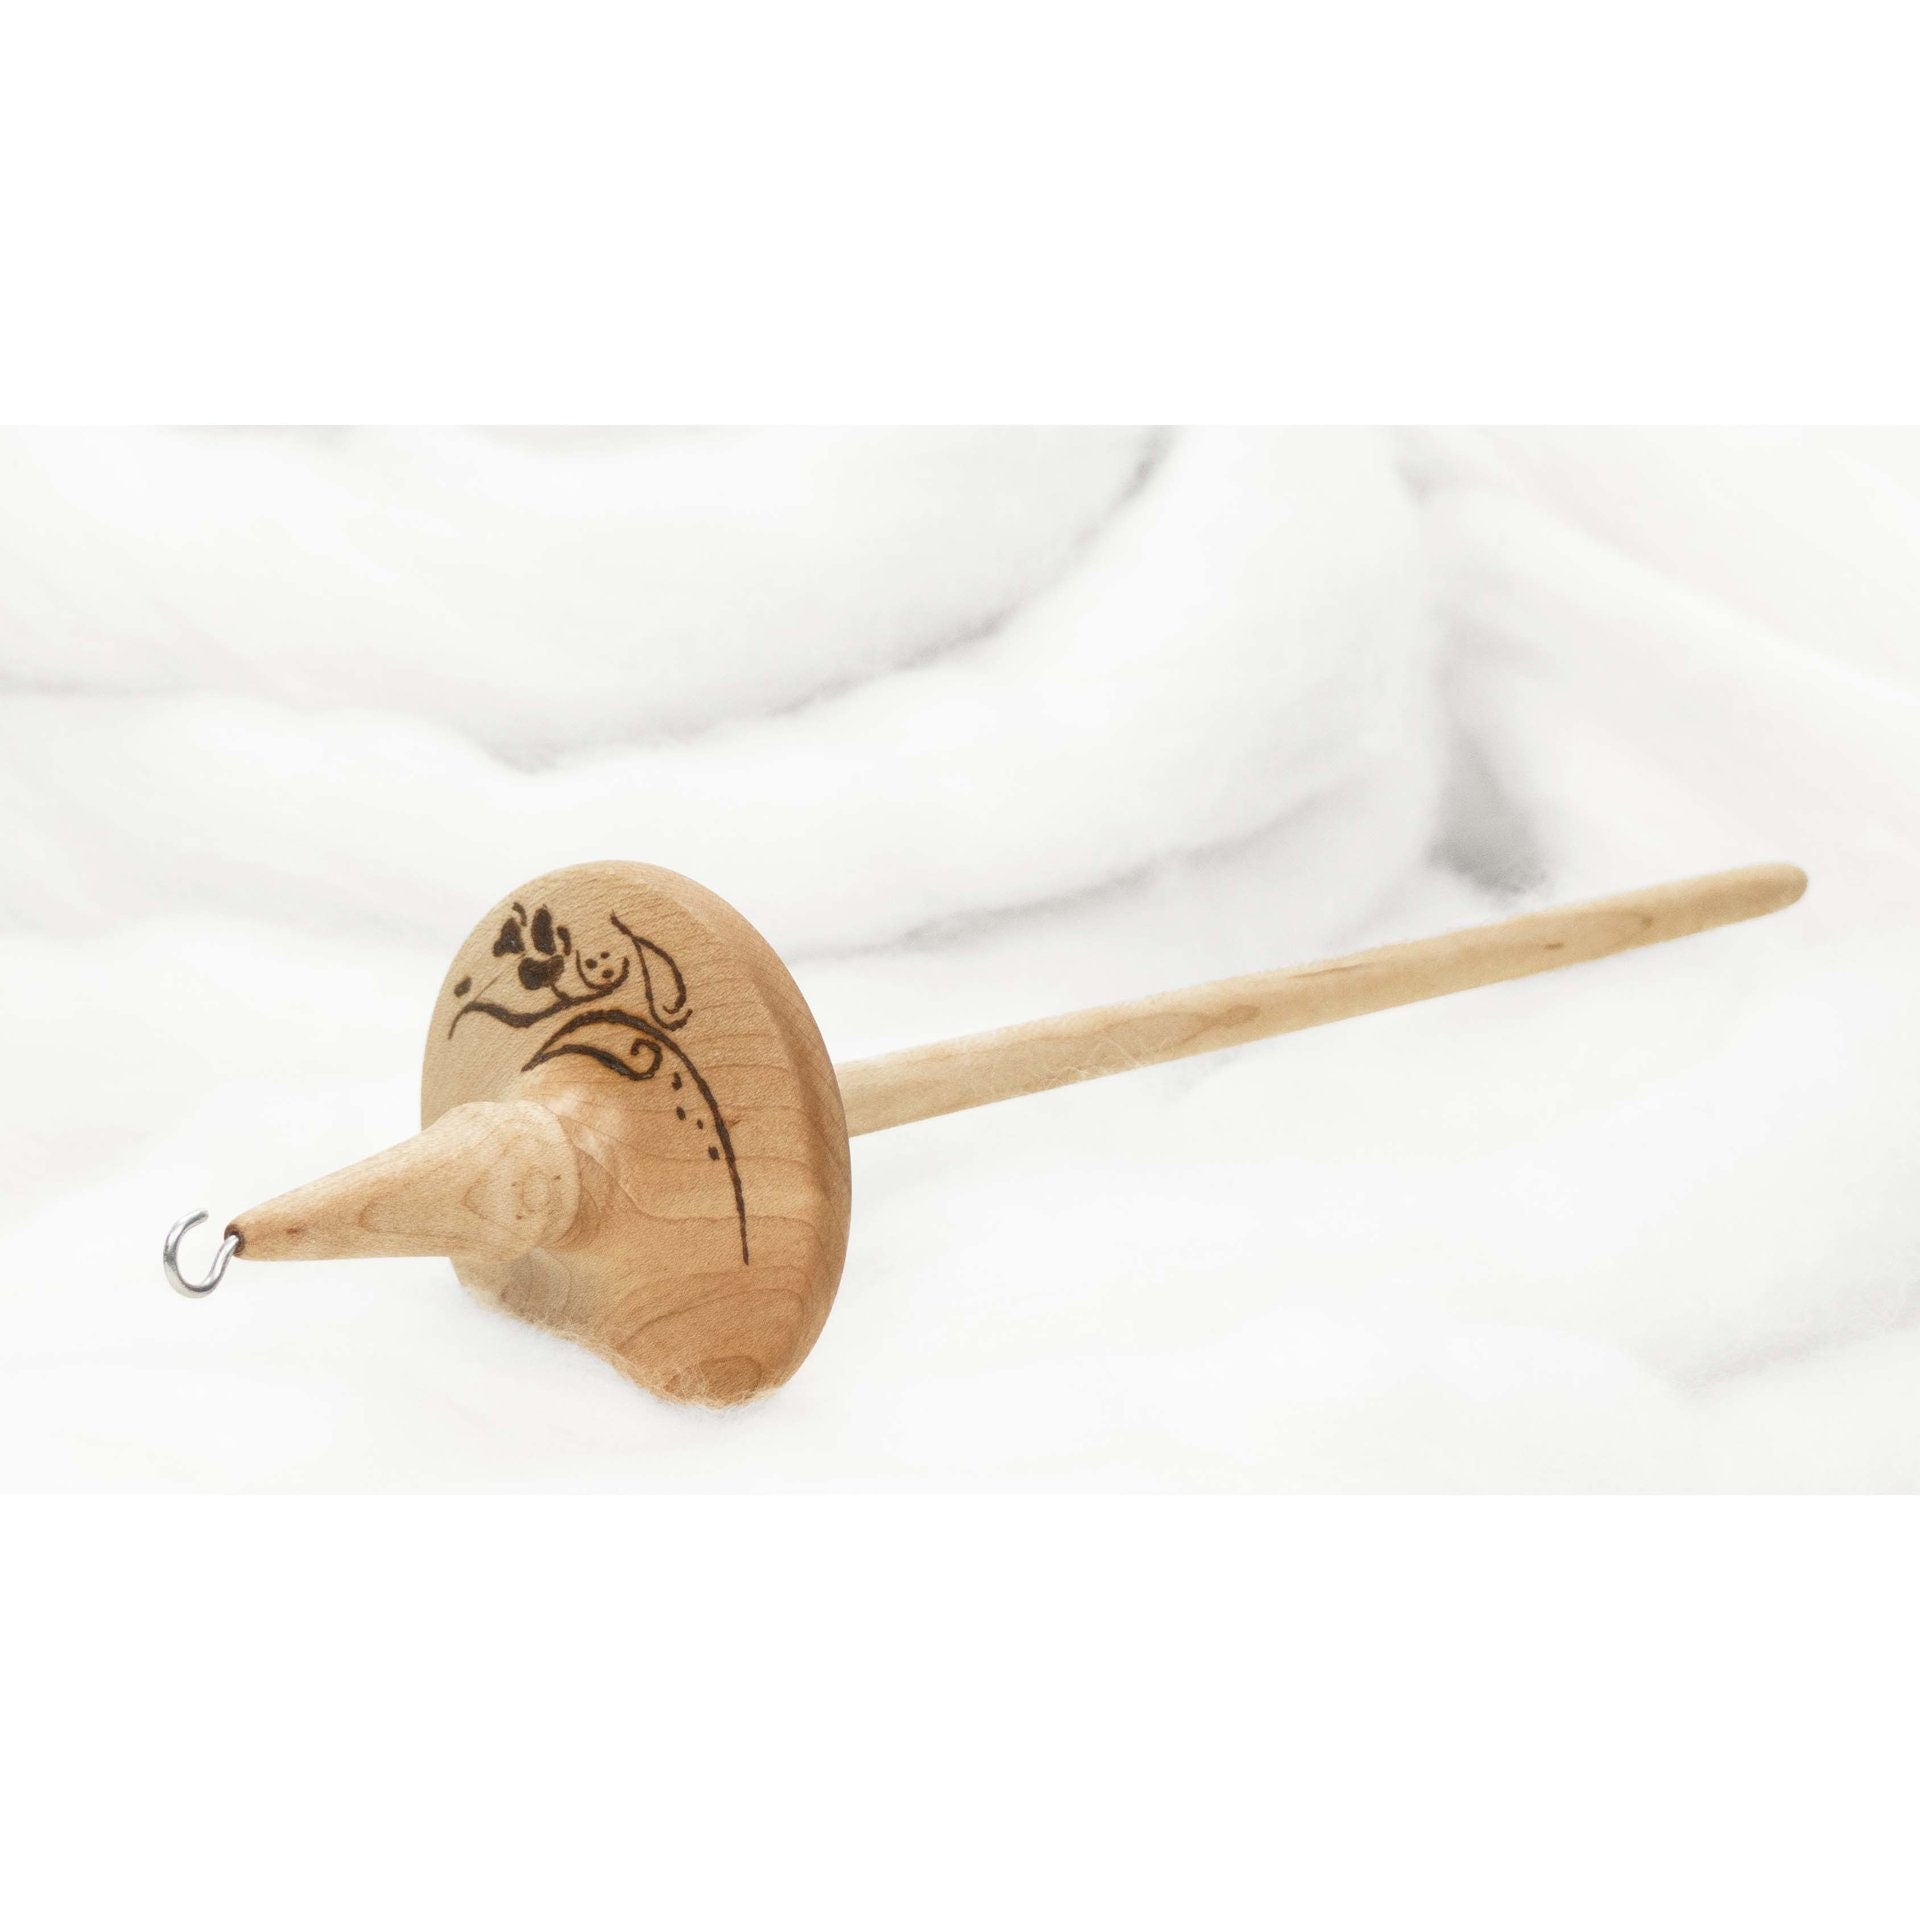 Rose Stencil - Lleto Hand-Turned Maple Wood Pyrograph Drop Spindle Medium / Top Whorl 29 Grams